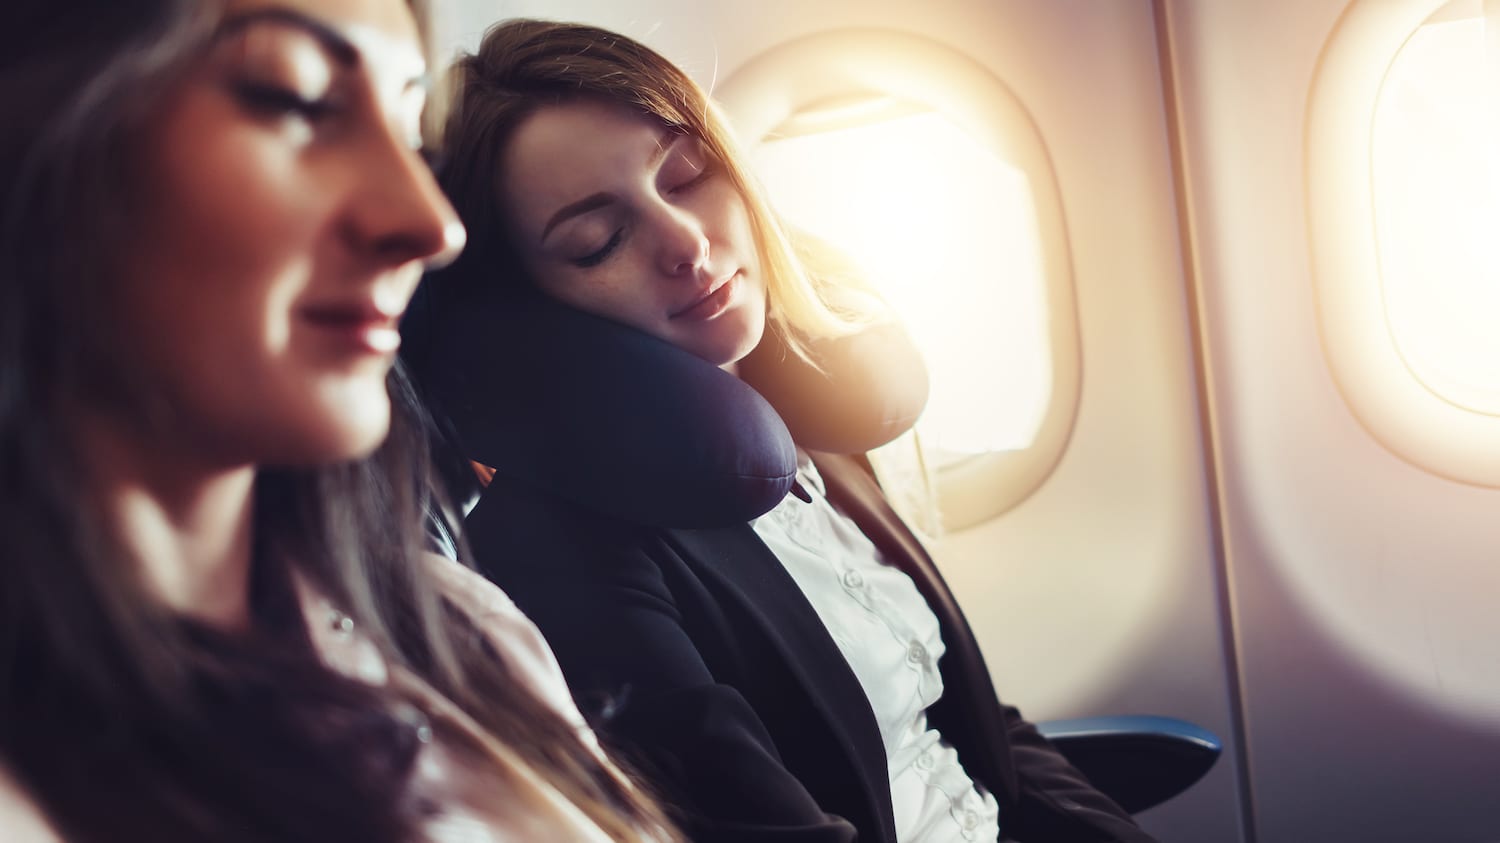 8 Back Pain Tips for Airplane Rides